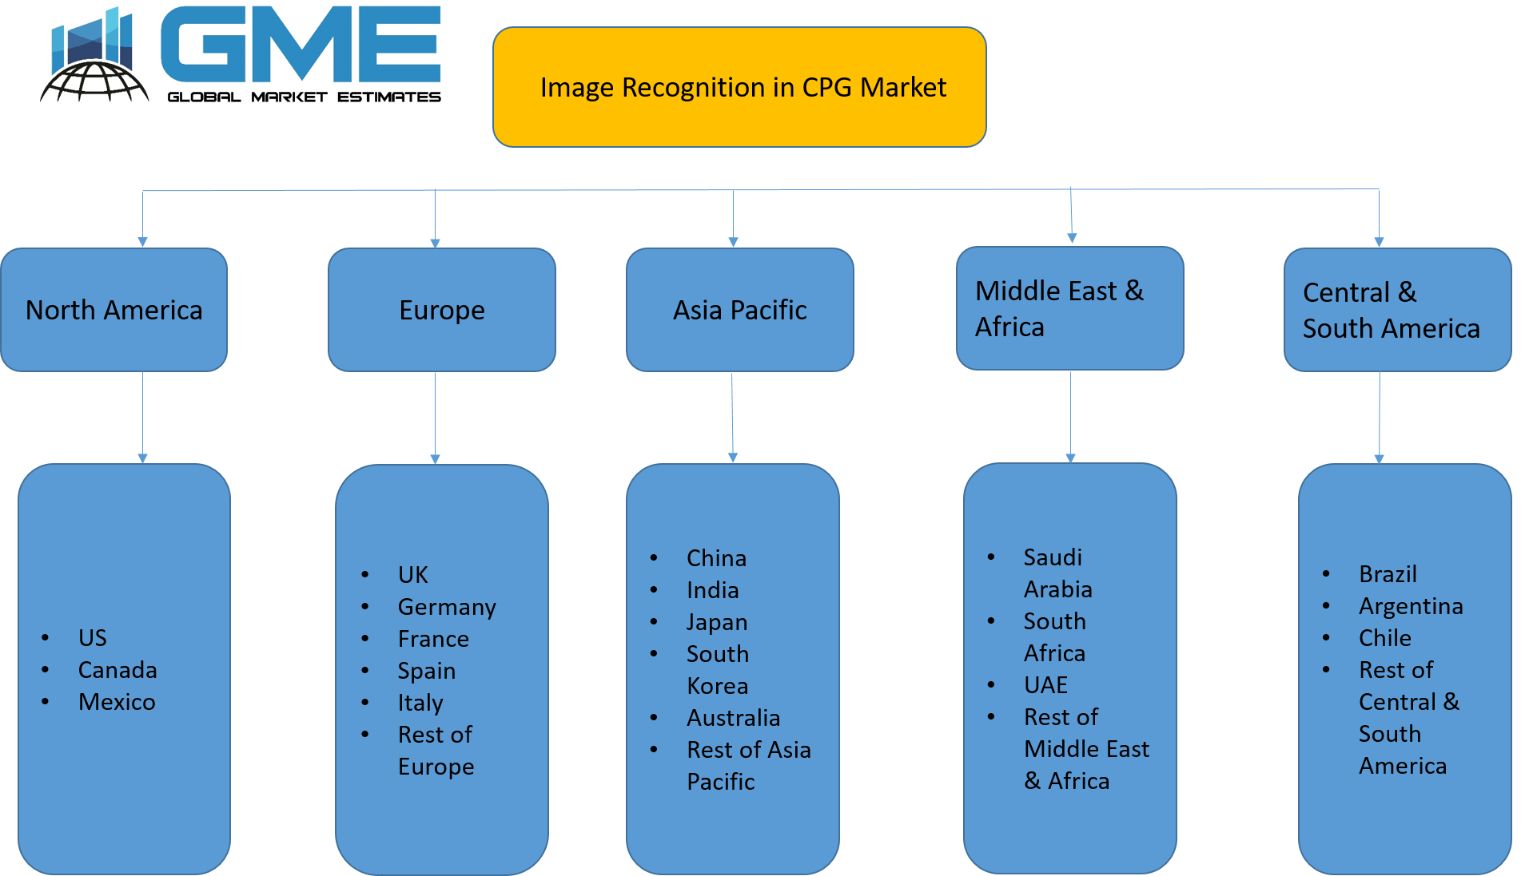 Image Recognition in CPG Market - Regional Analysis